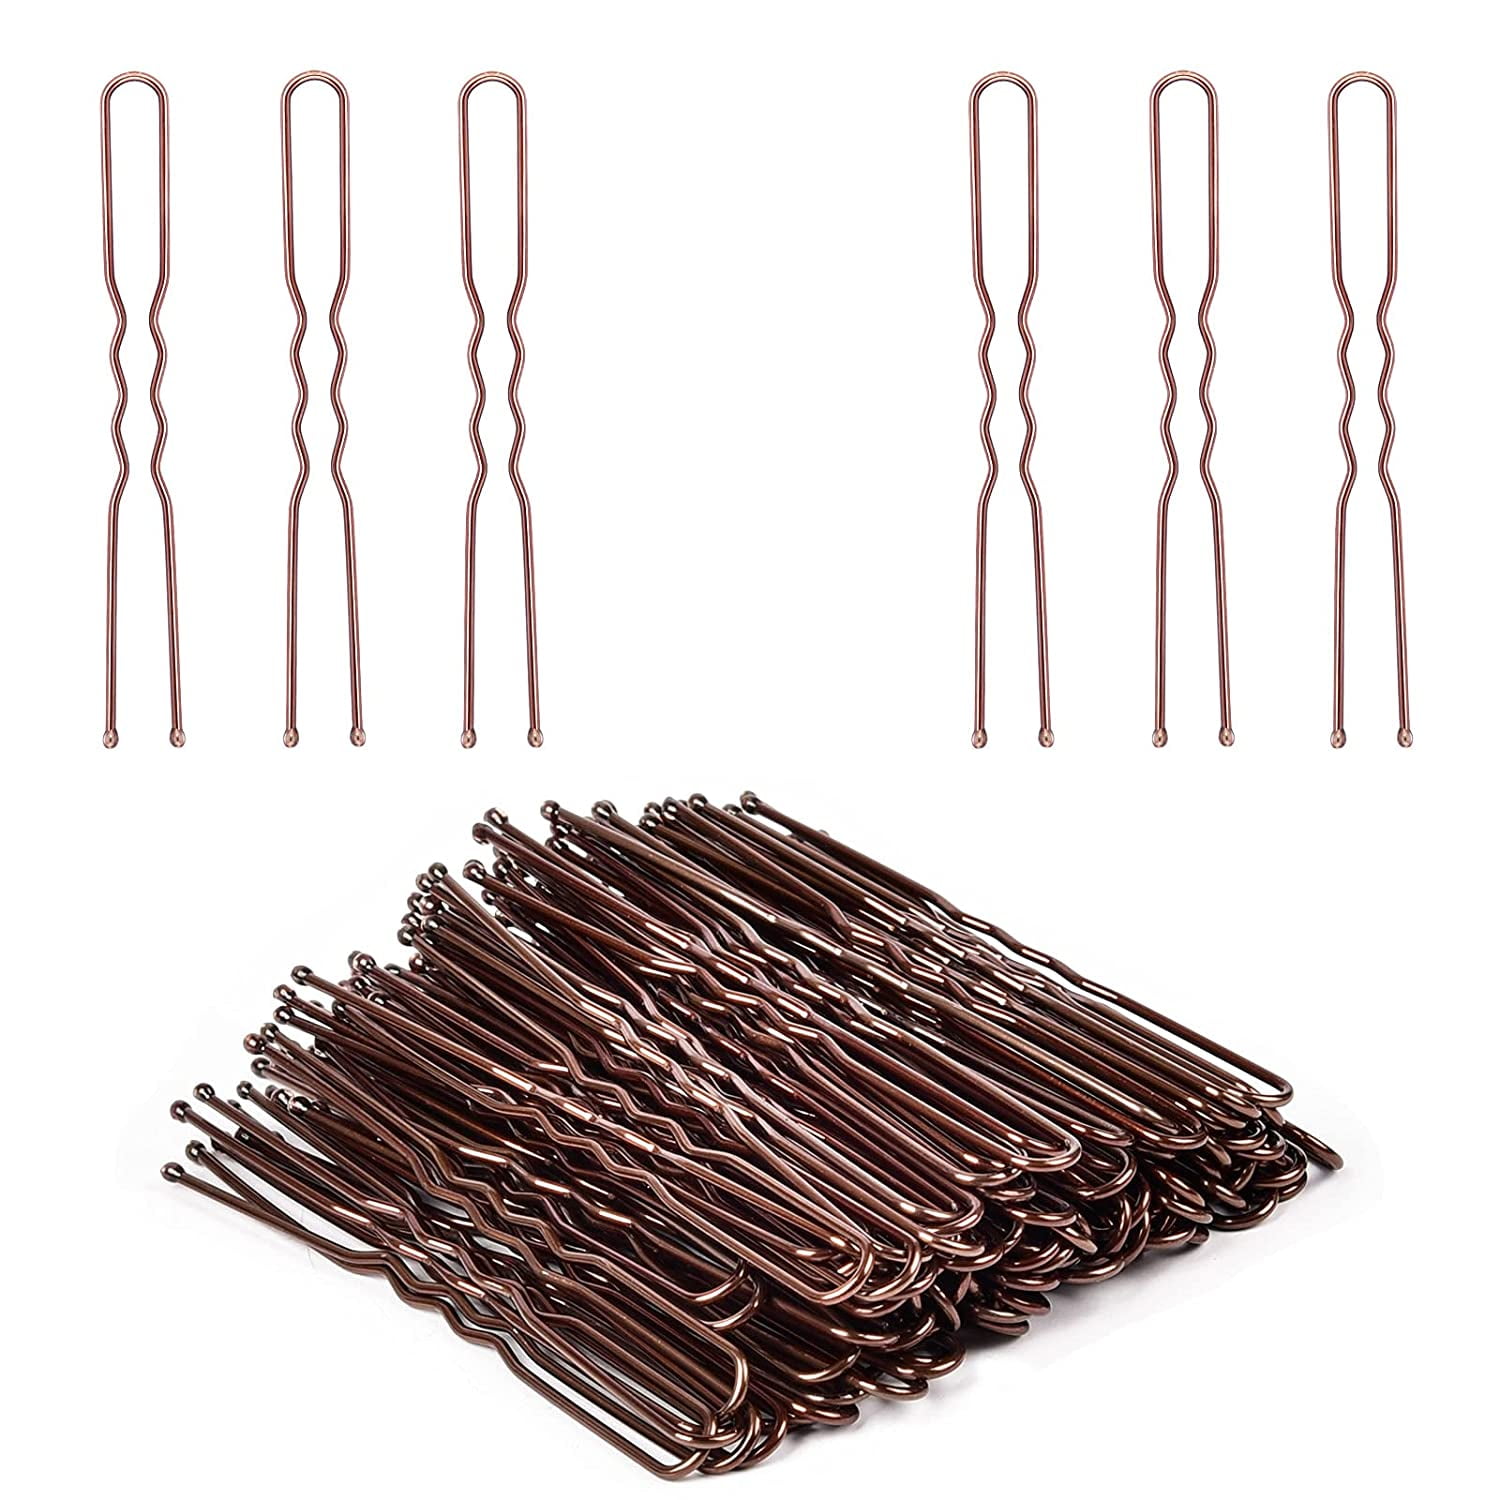 NEW PACK 30 METAL KIRBY HAIR GRIPS CLIPS BOBBY PINS 6cm FOR BUN UP DO TIDY  HAIR Mädchen LA2415206